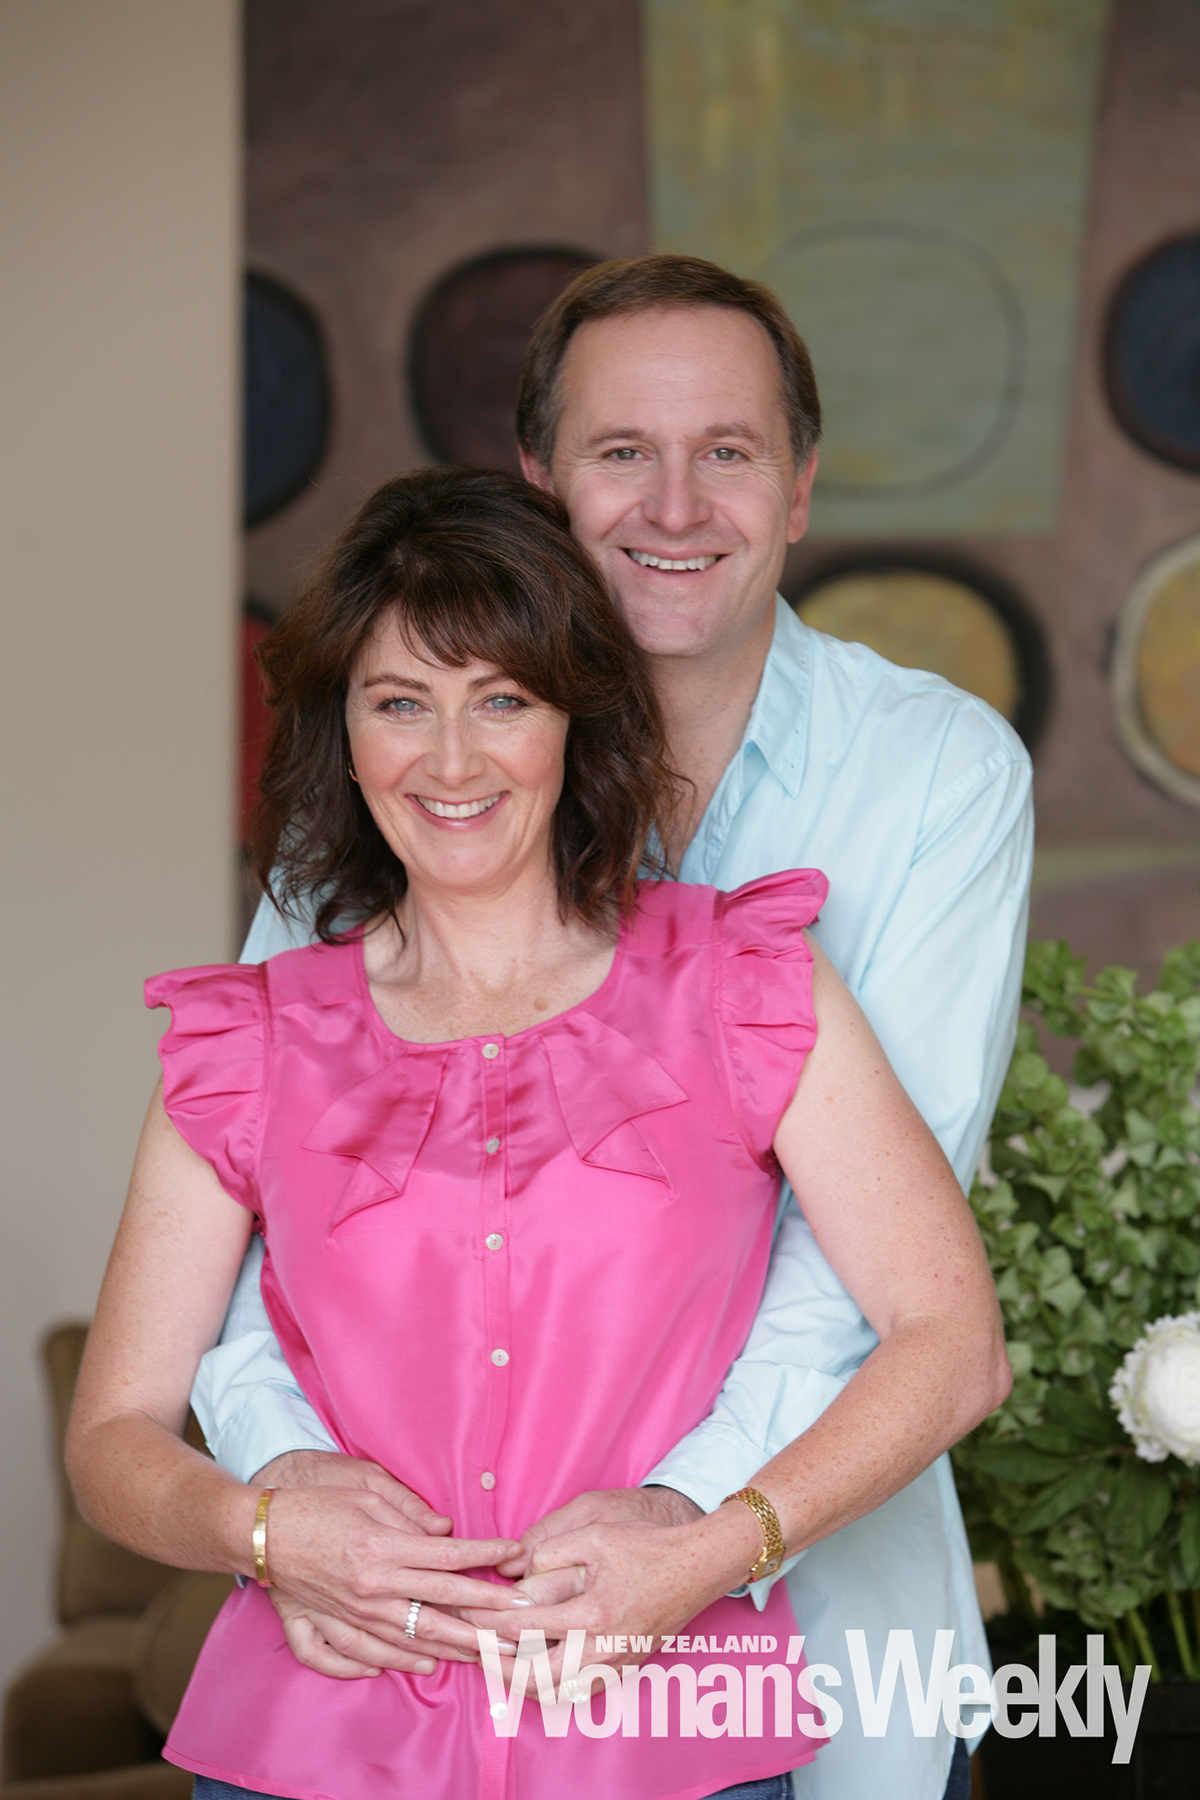 John Key and wife Bronagh: In their own words